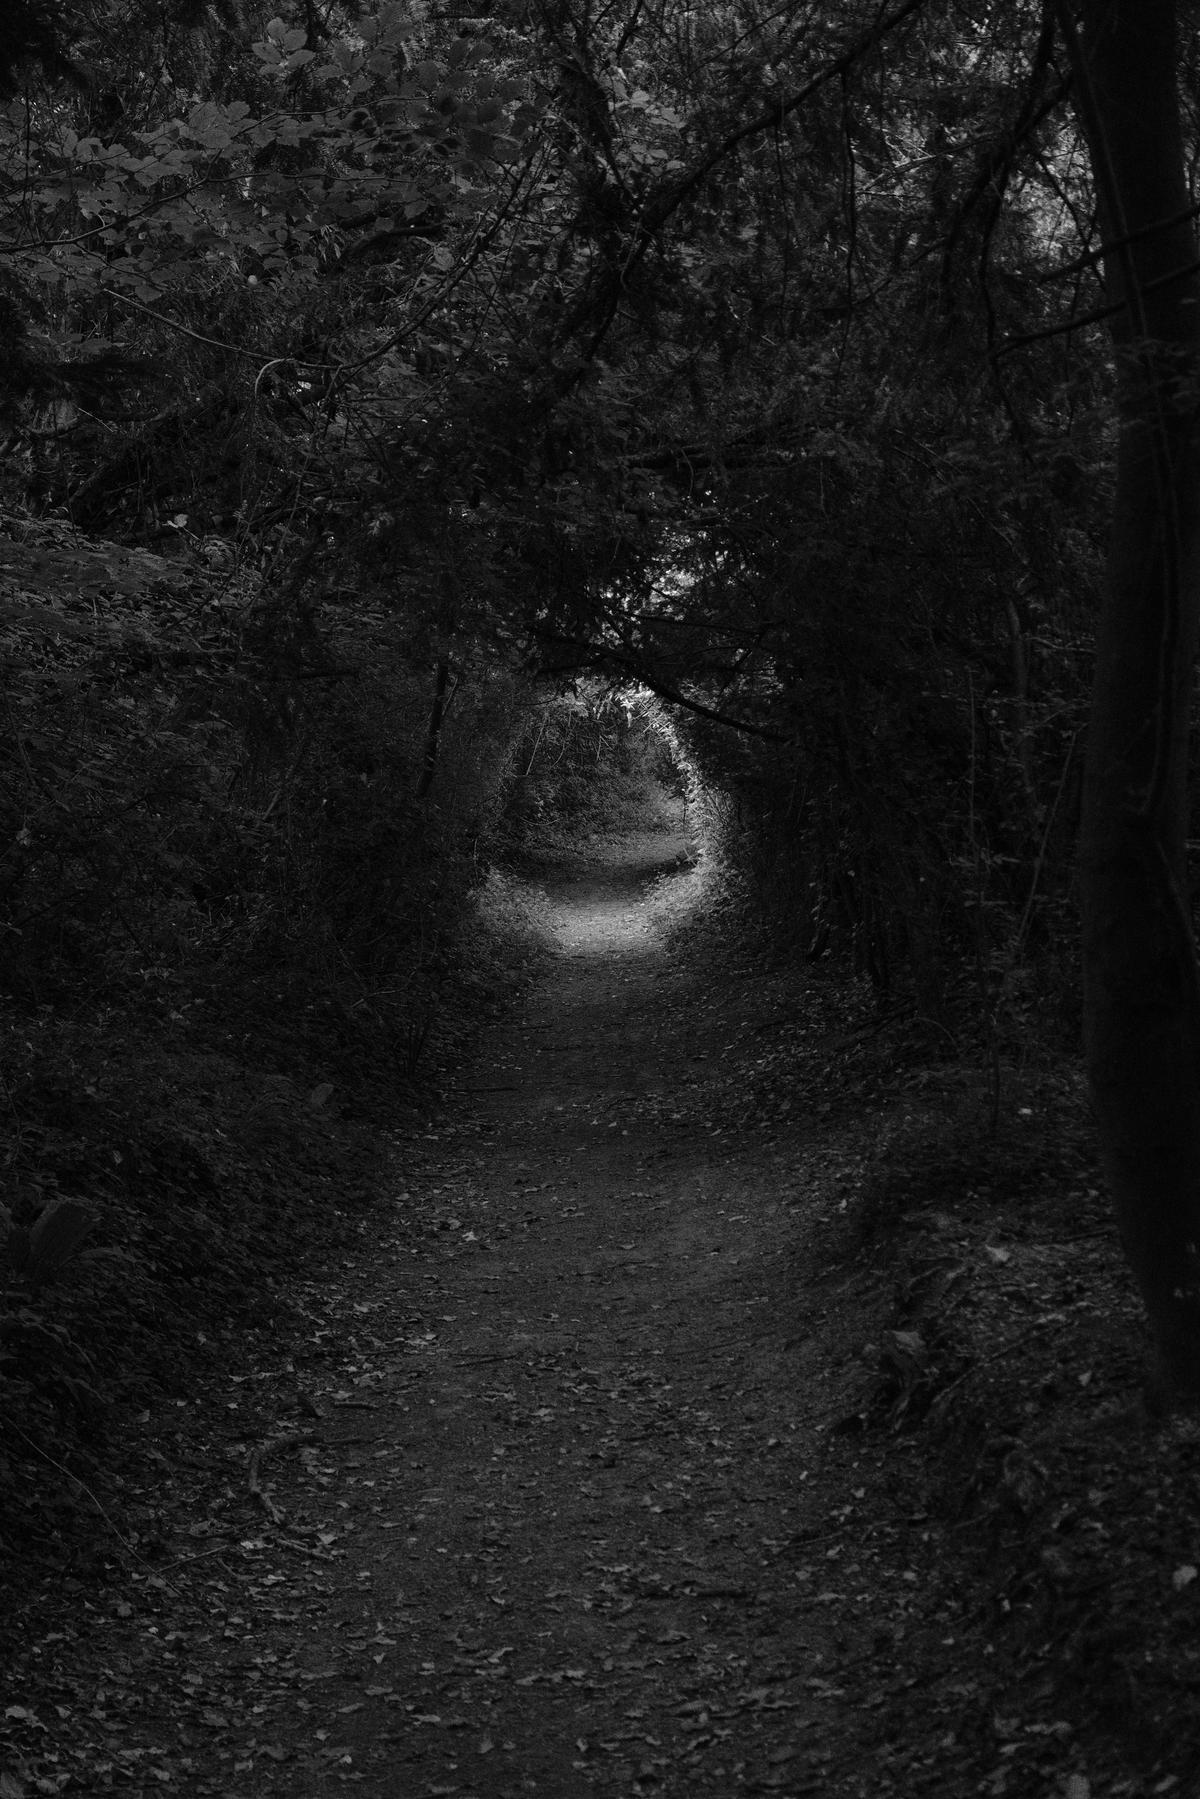 A patch of light bursts through into a darkened covered path 